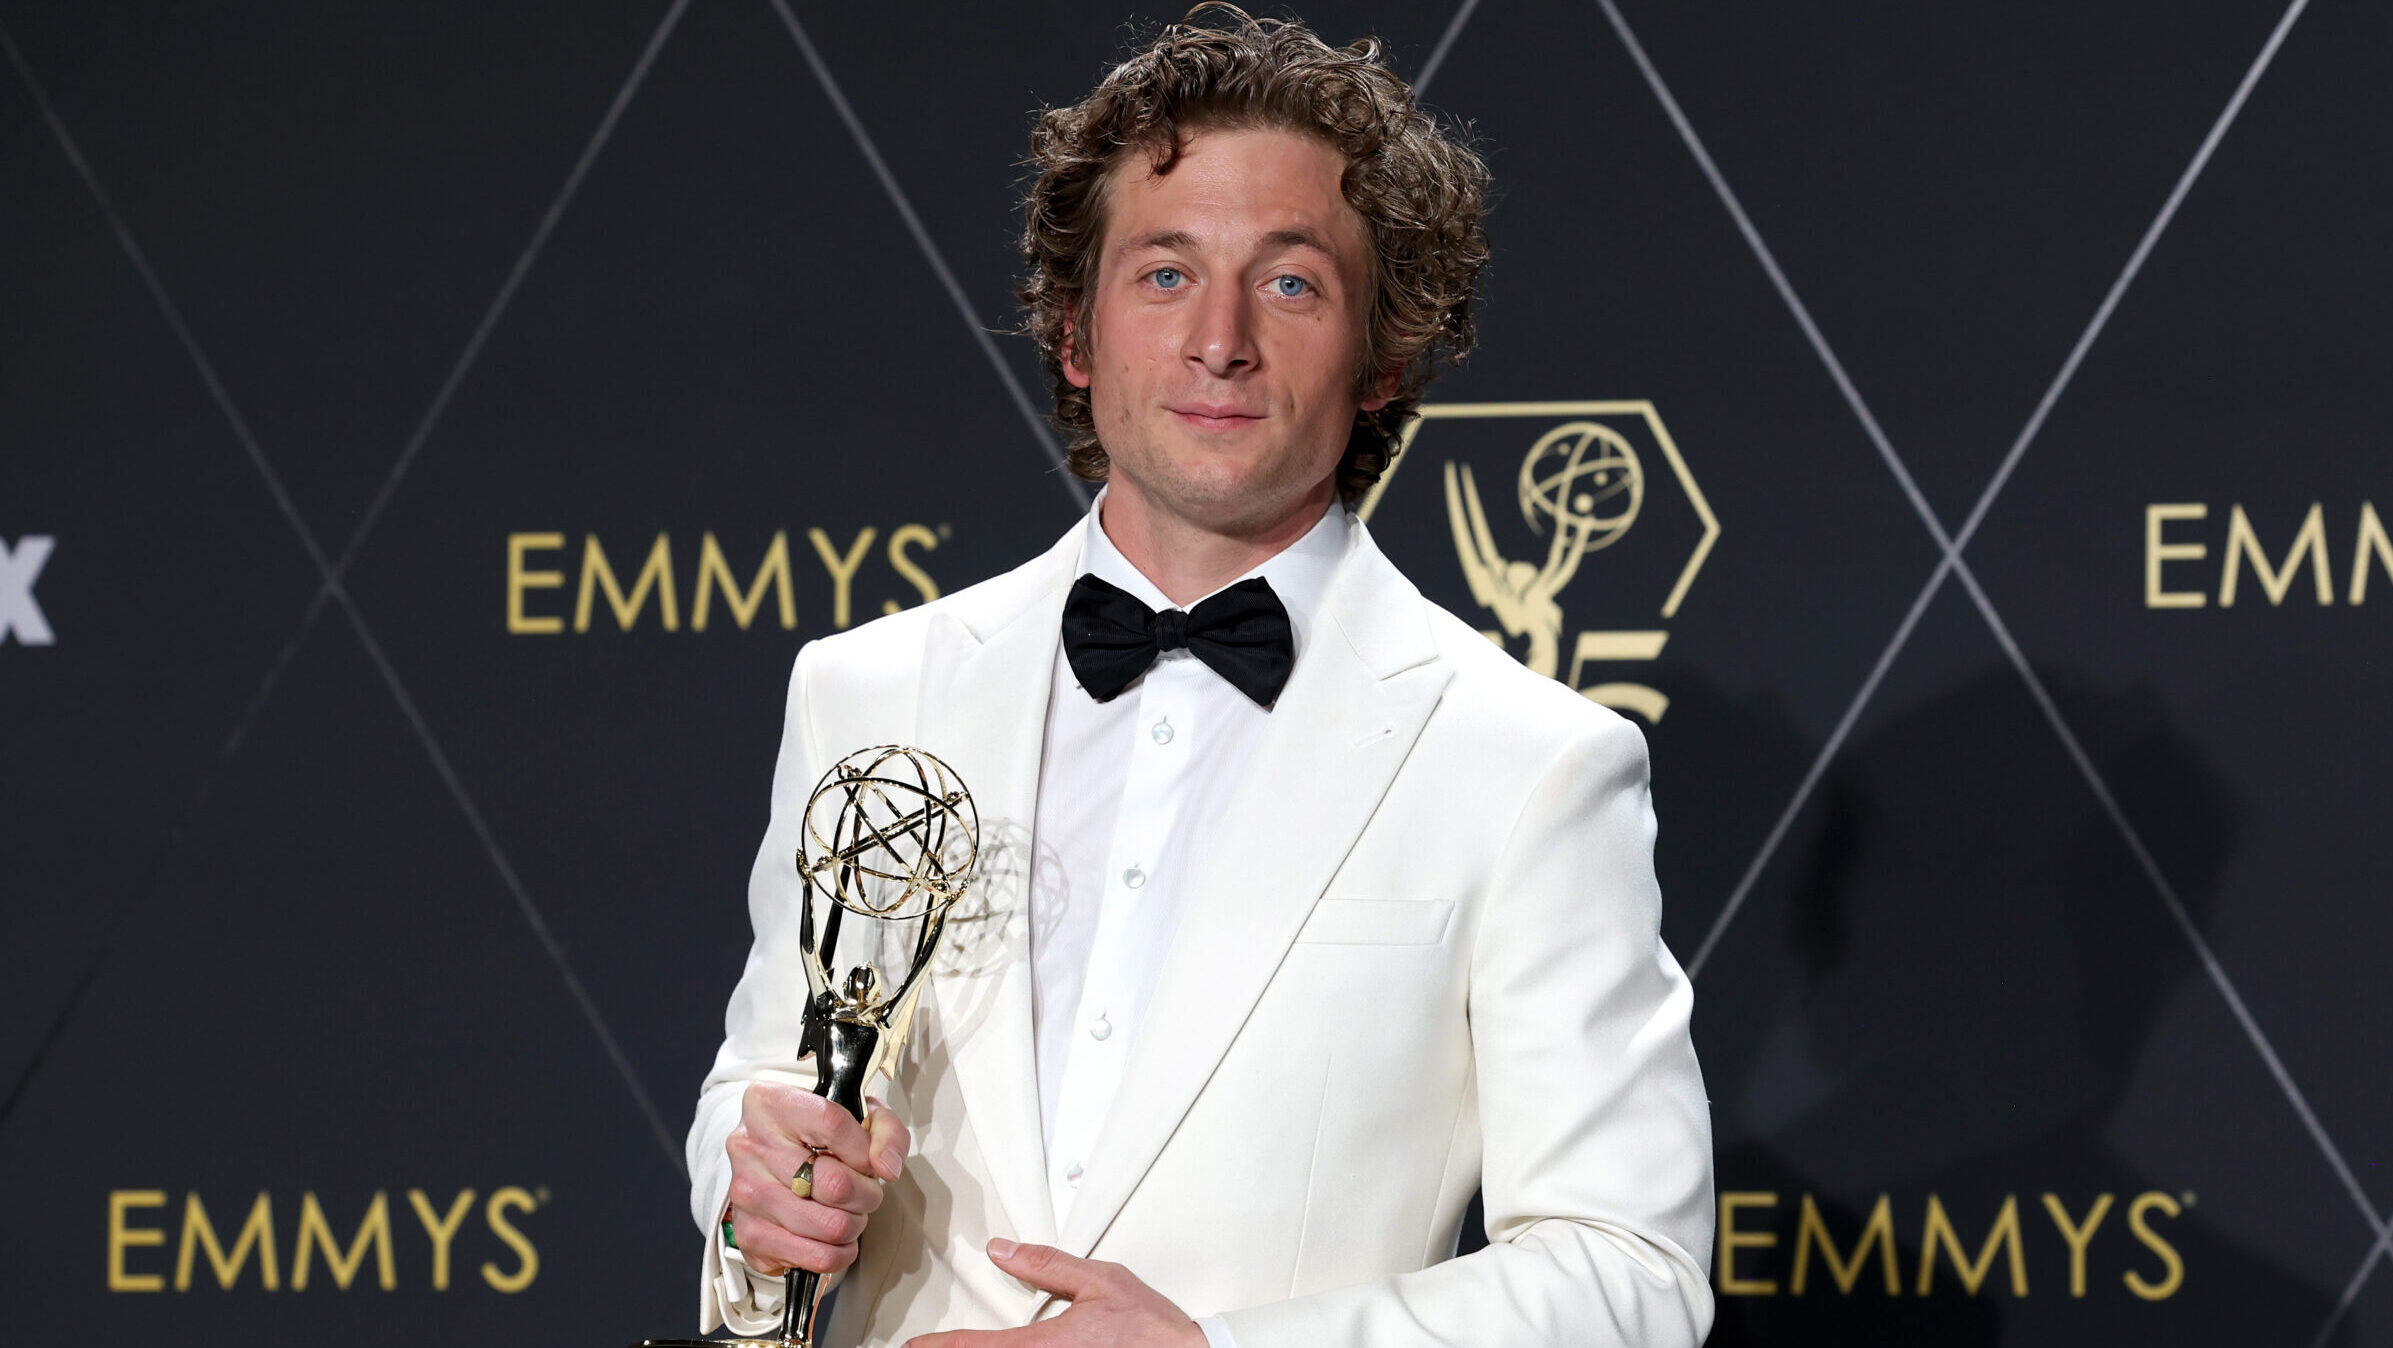 Jeremy Allen White Says He’d Compete in WWE Under This One Condition